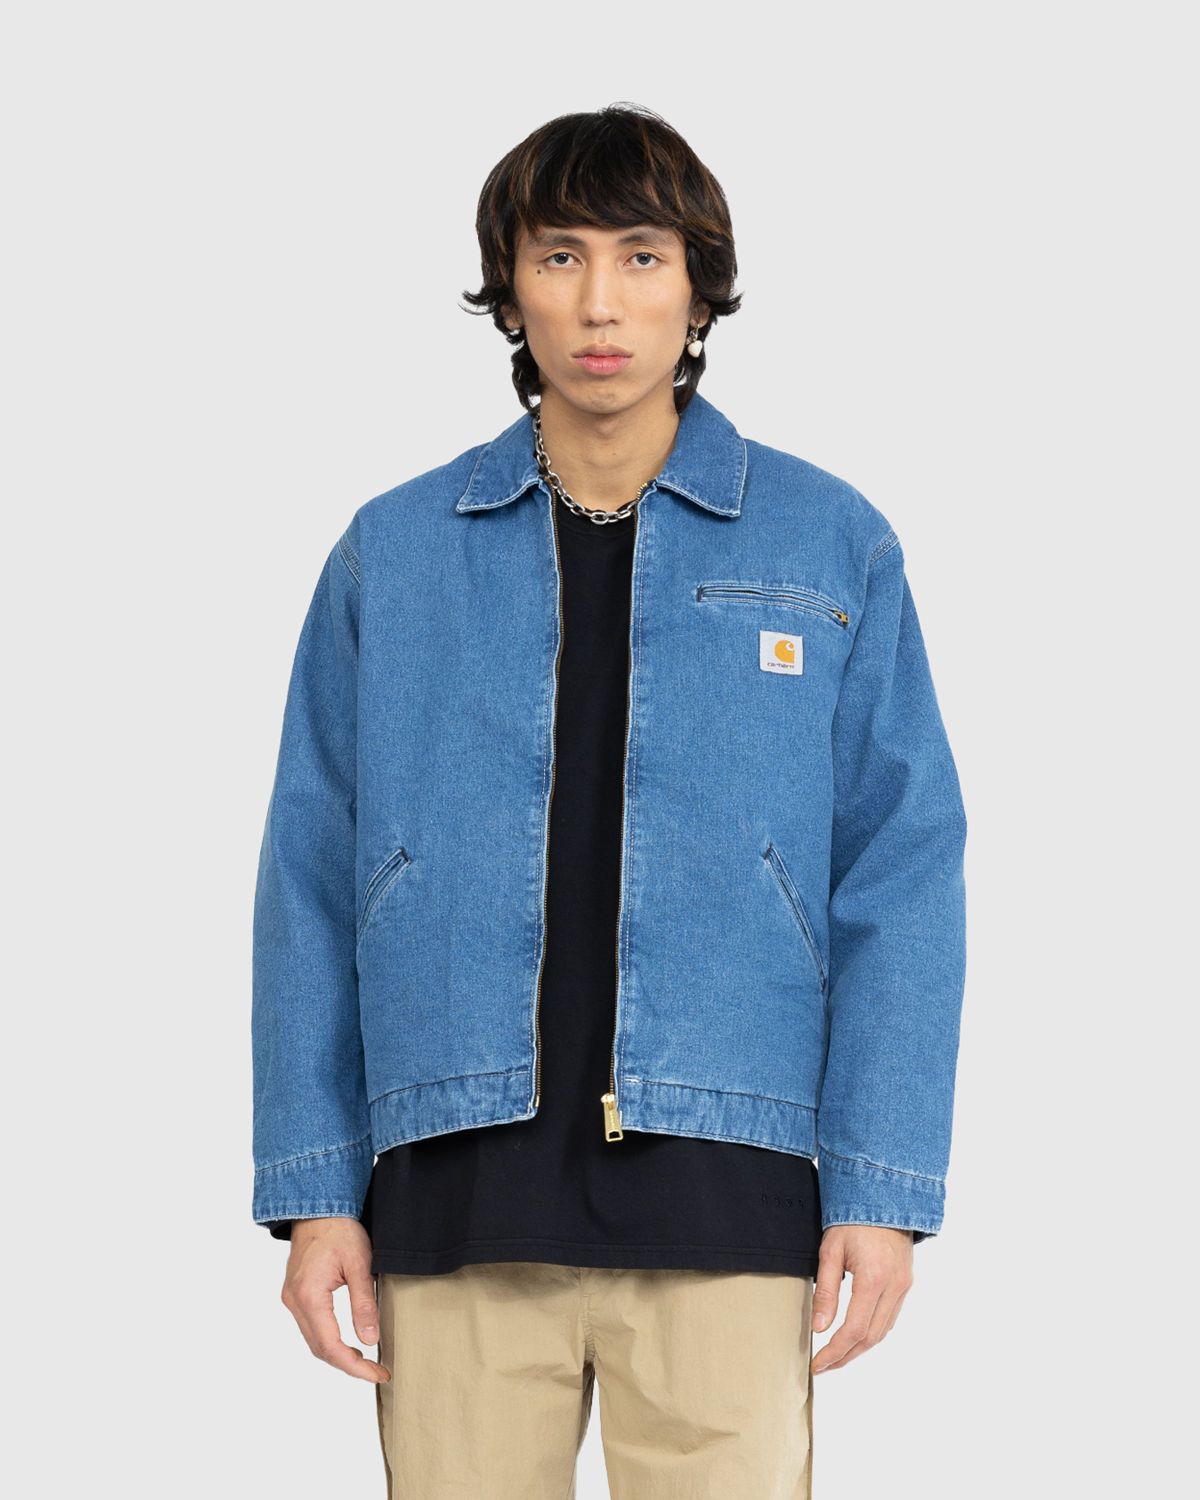 OG DETROIT JACKET / CARHARTT WIP / BLUE STONE WASHED - Spoon Clothes